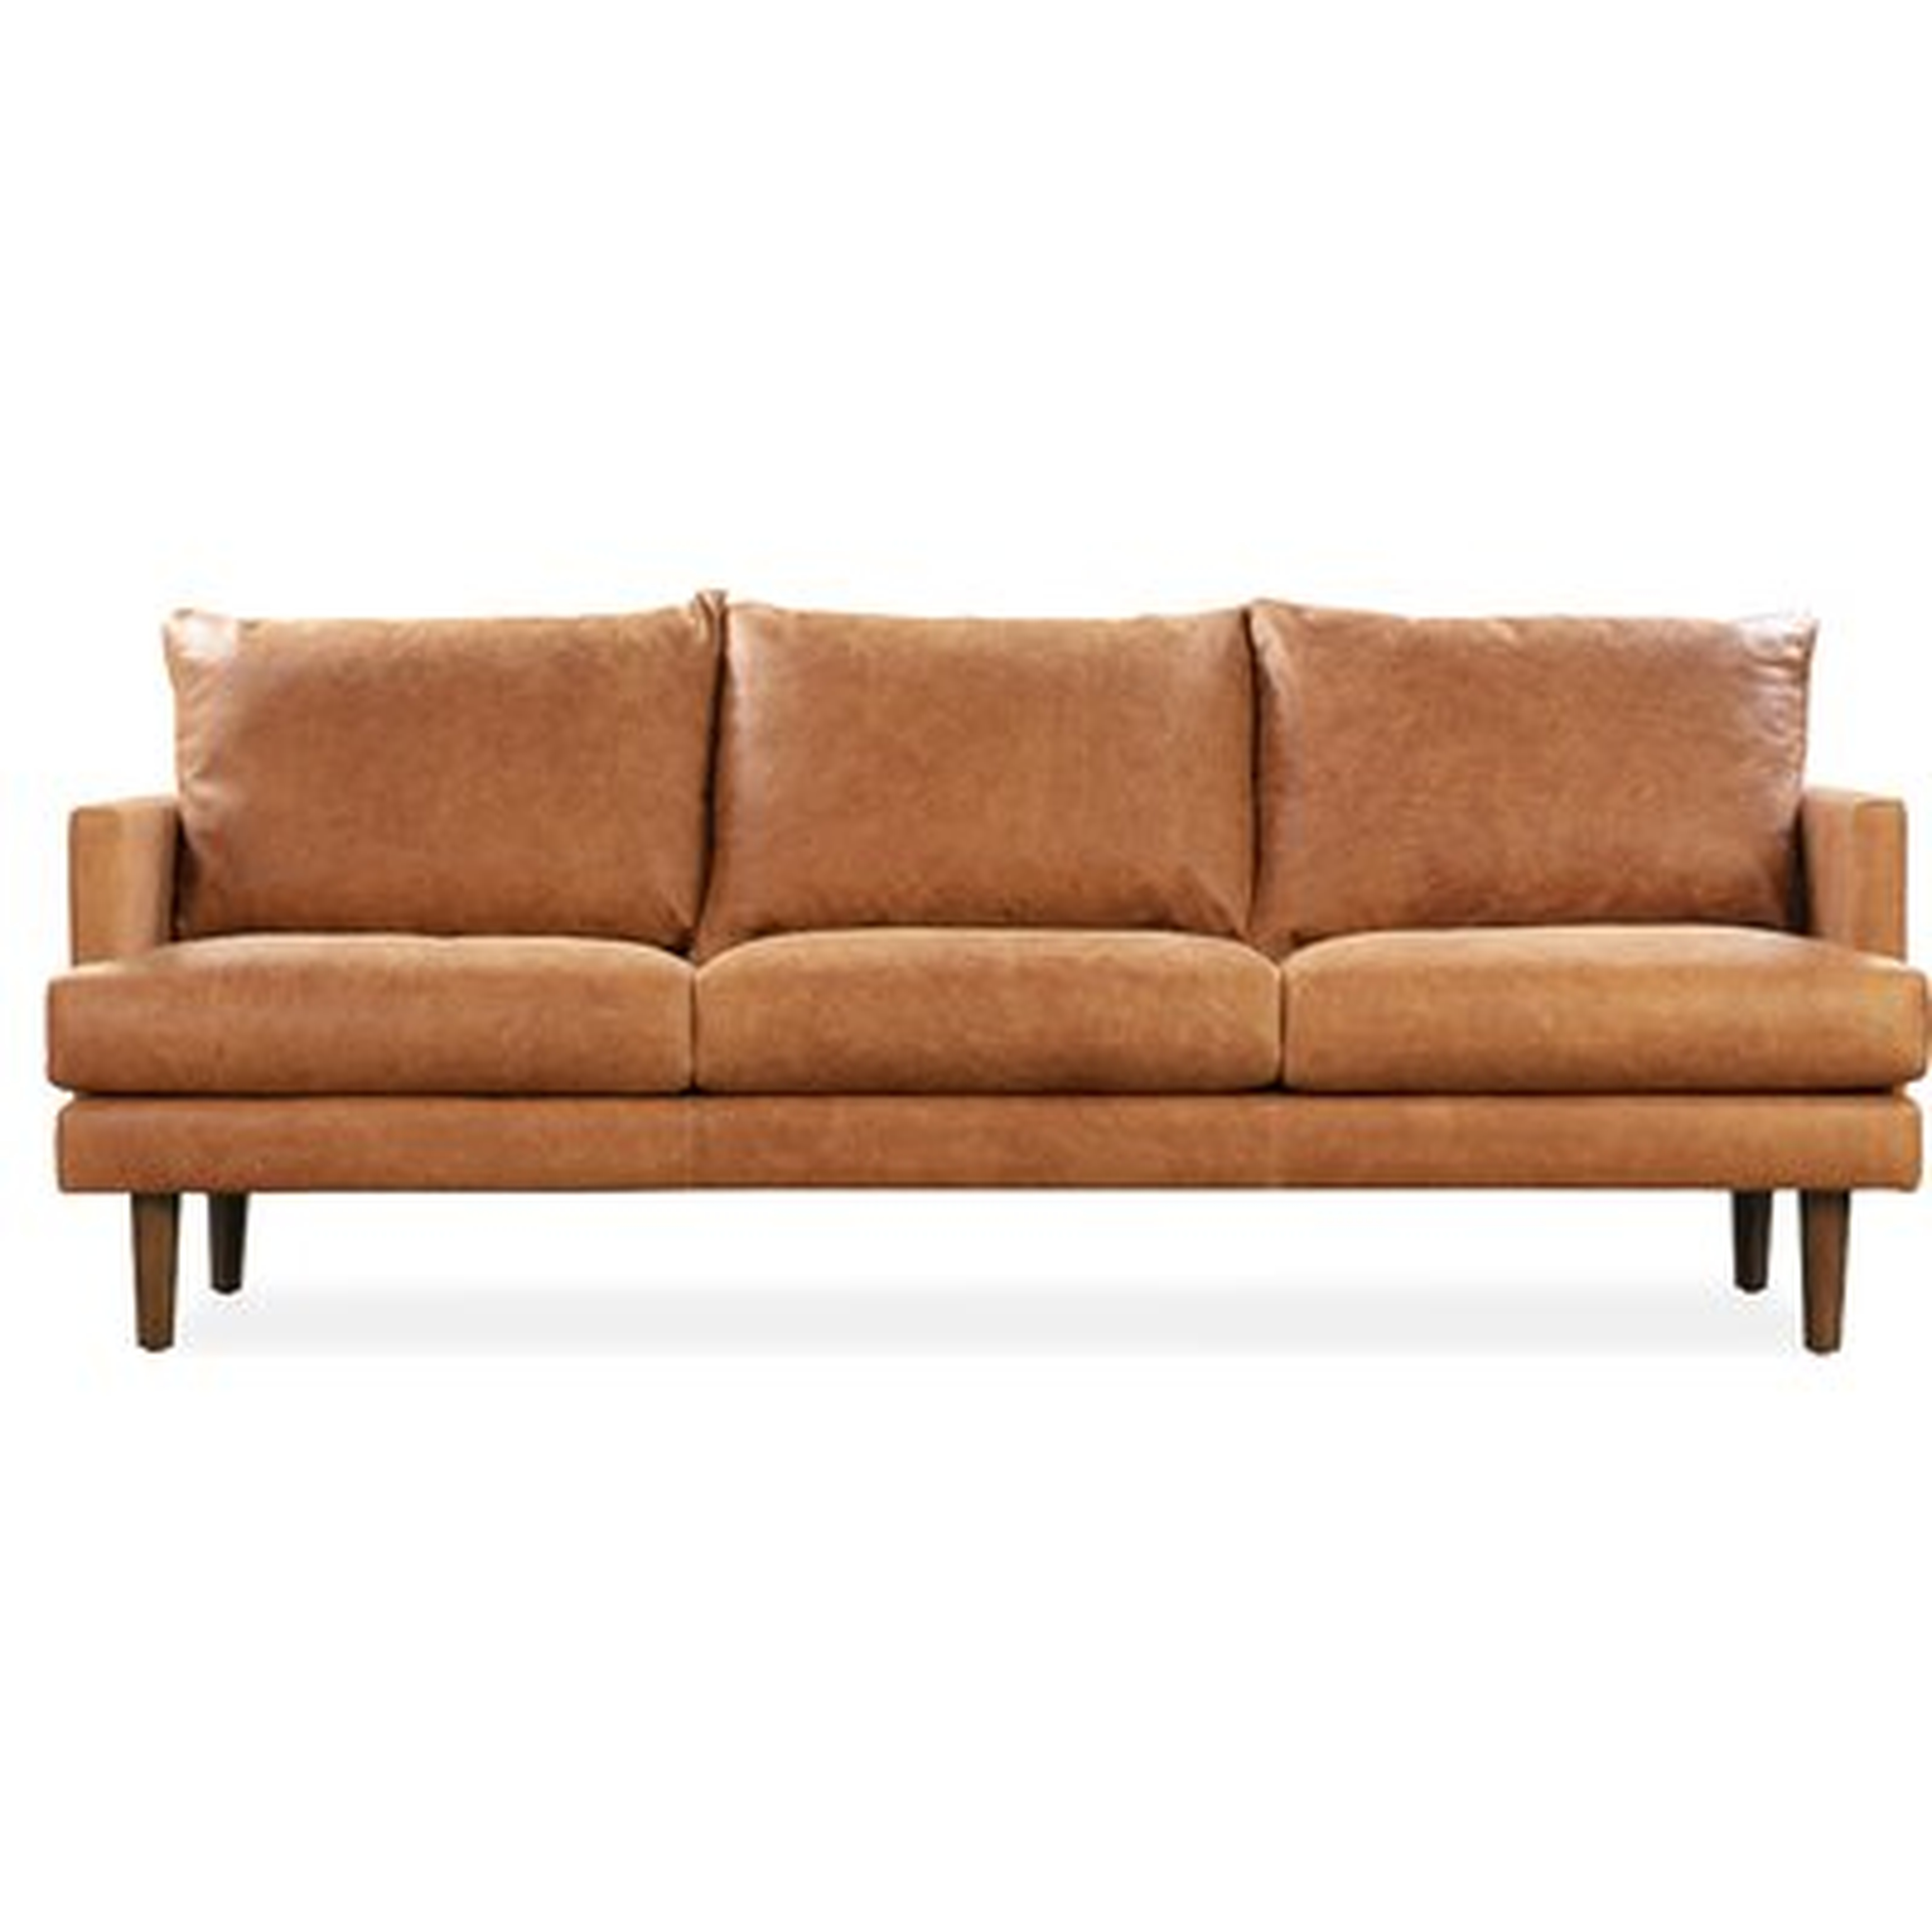 Underhill 88" Genuine Leather Square Arm Sofa with Reversible Cushions - Wayfair